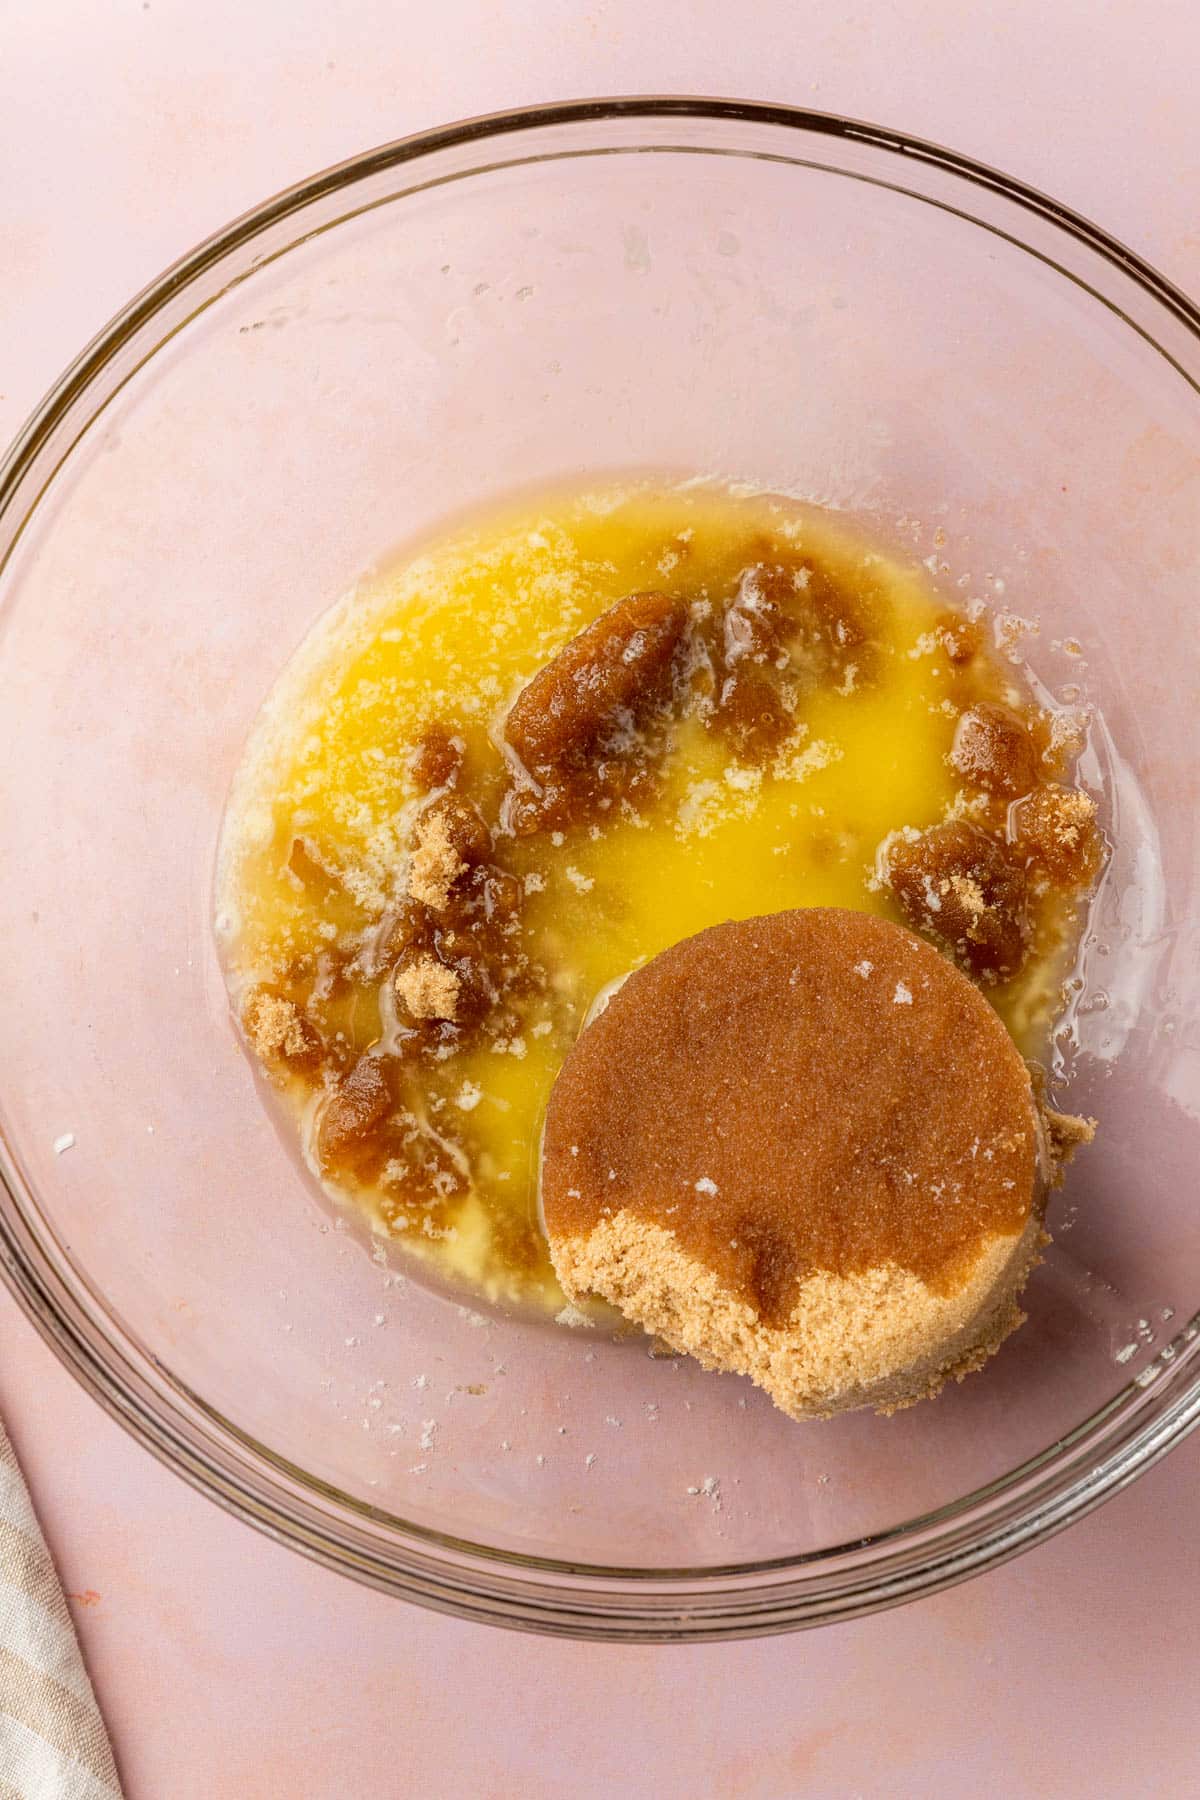 A glass mixing bowl filled with melted butter and a scoop of brown sugar before mixing together.